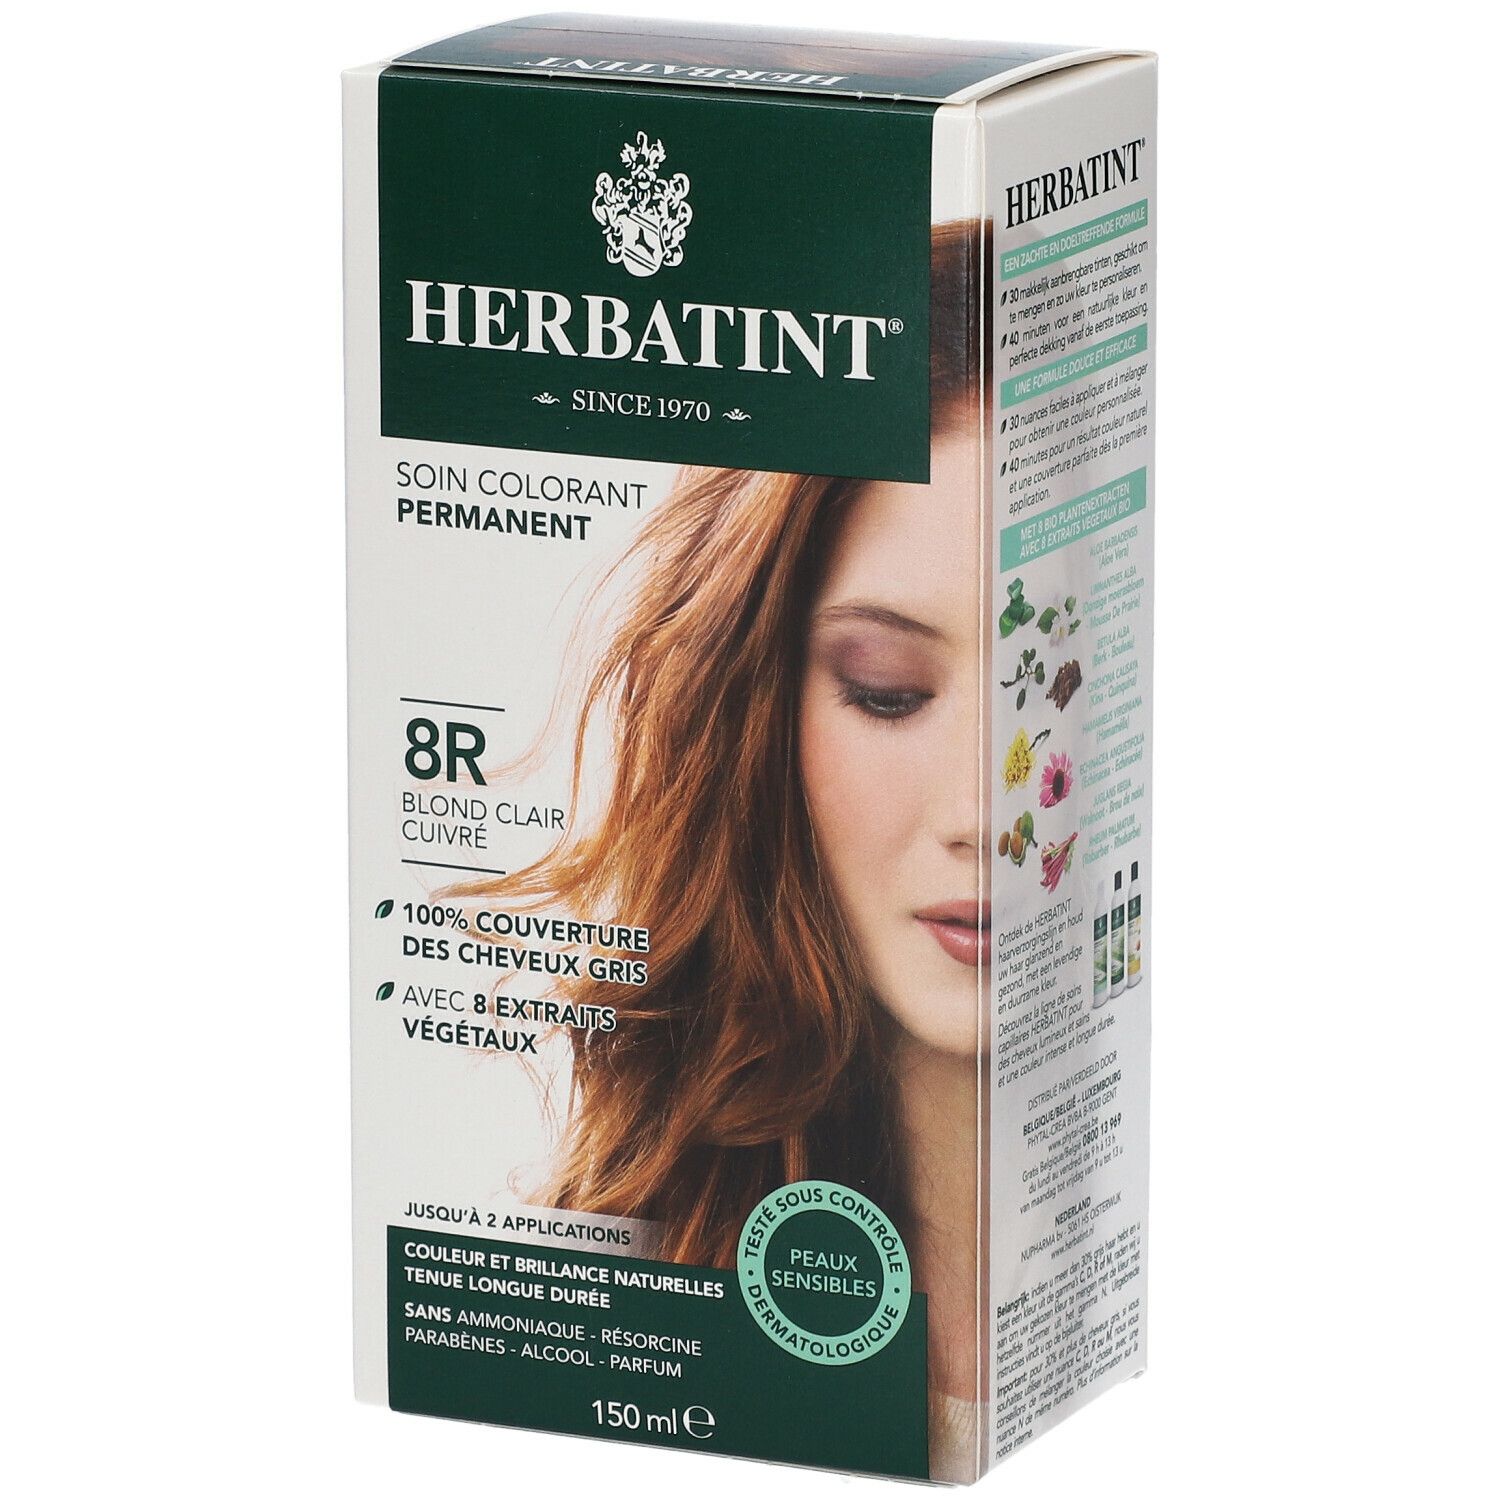 Herbatint Soin Colorant Permanent Blond Clair Cuivre 8R